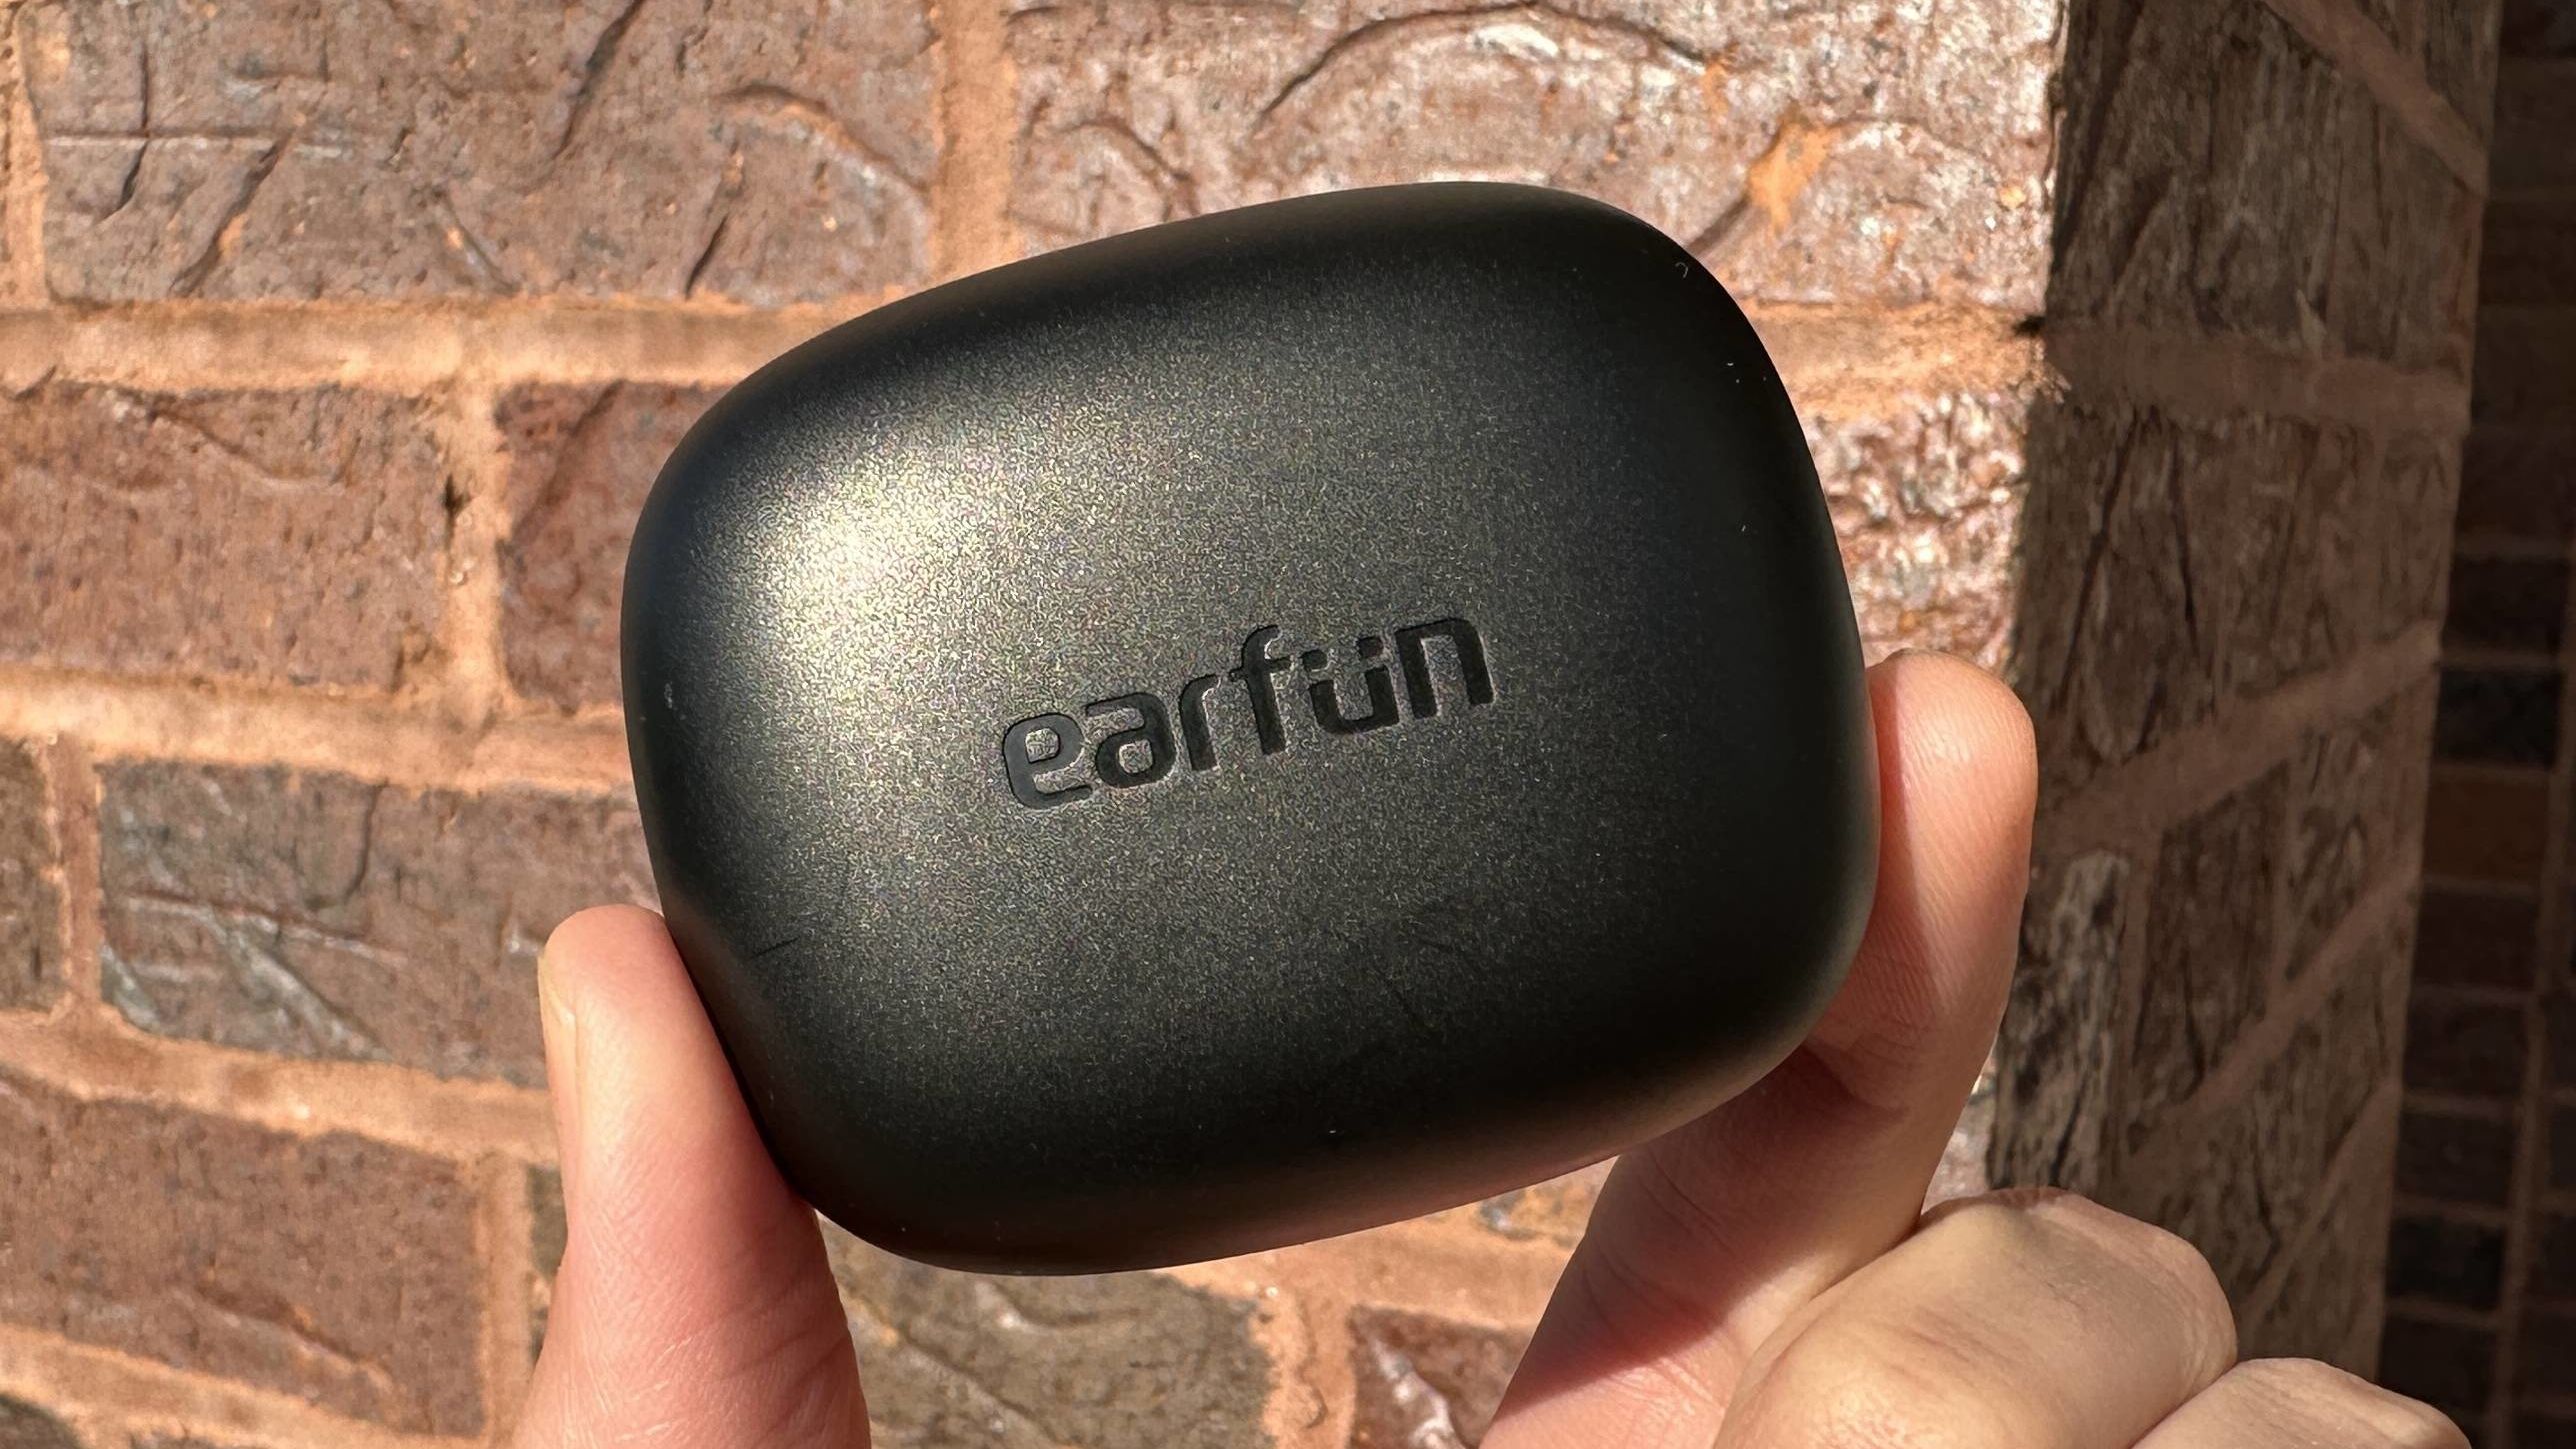 EarFun Air Pro 3: Ideal budget earbuds with noise-canceling - TechTalks